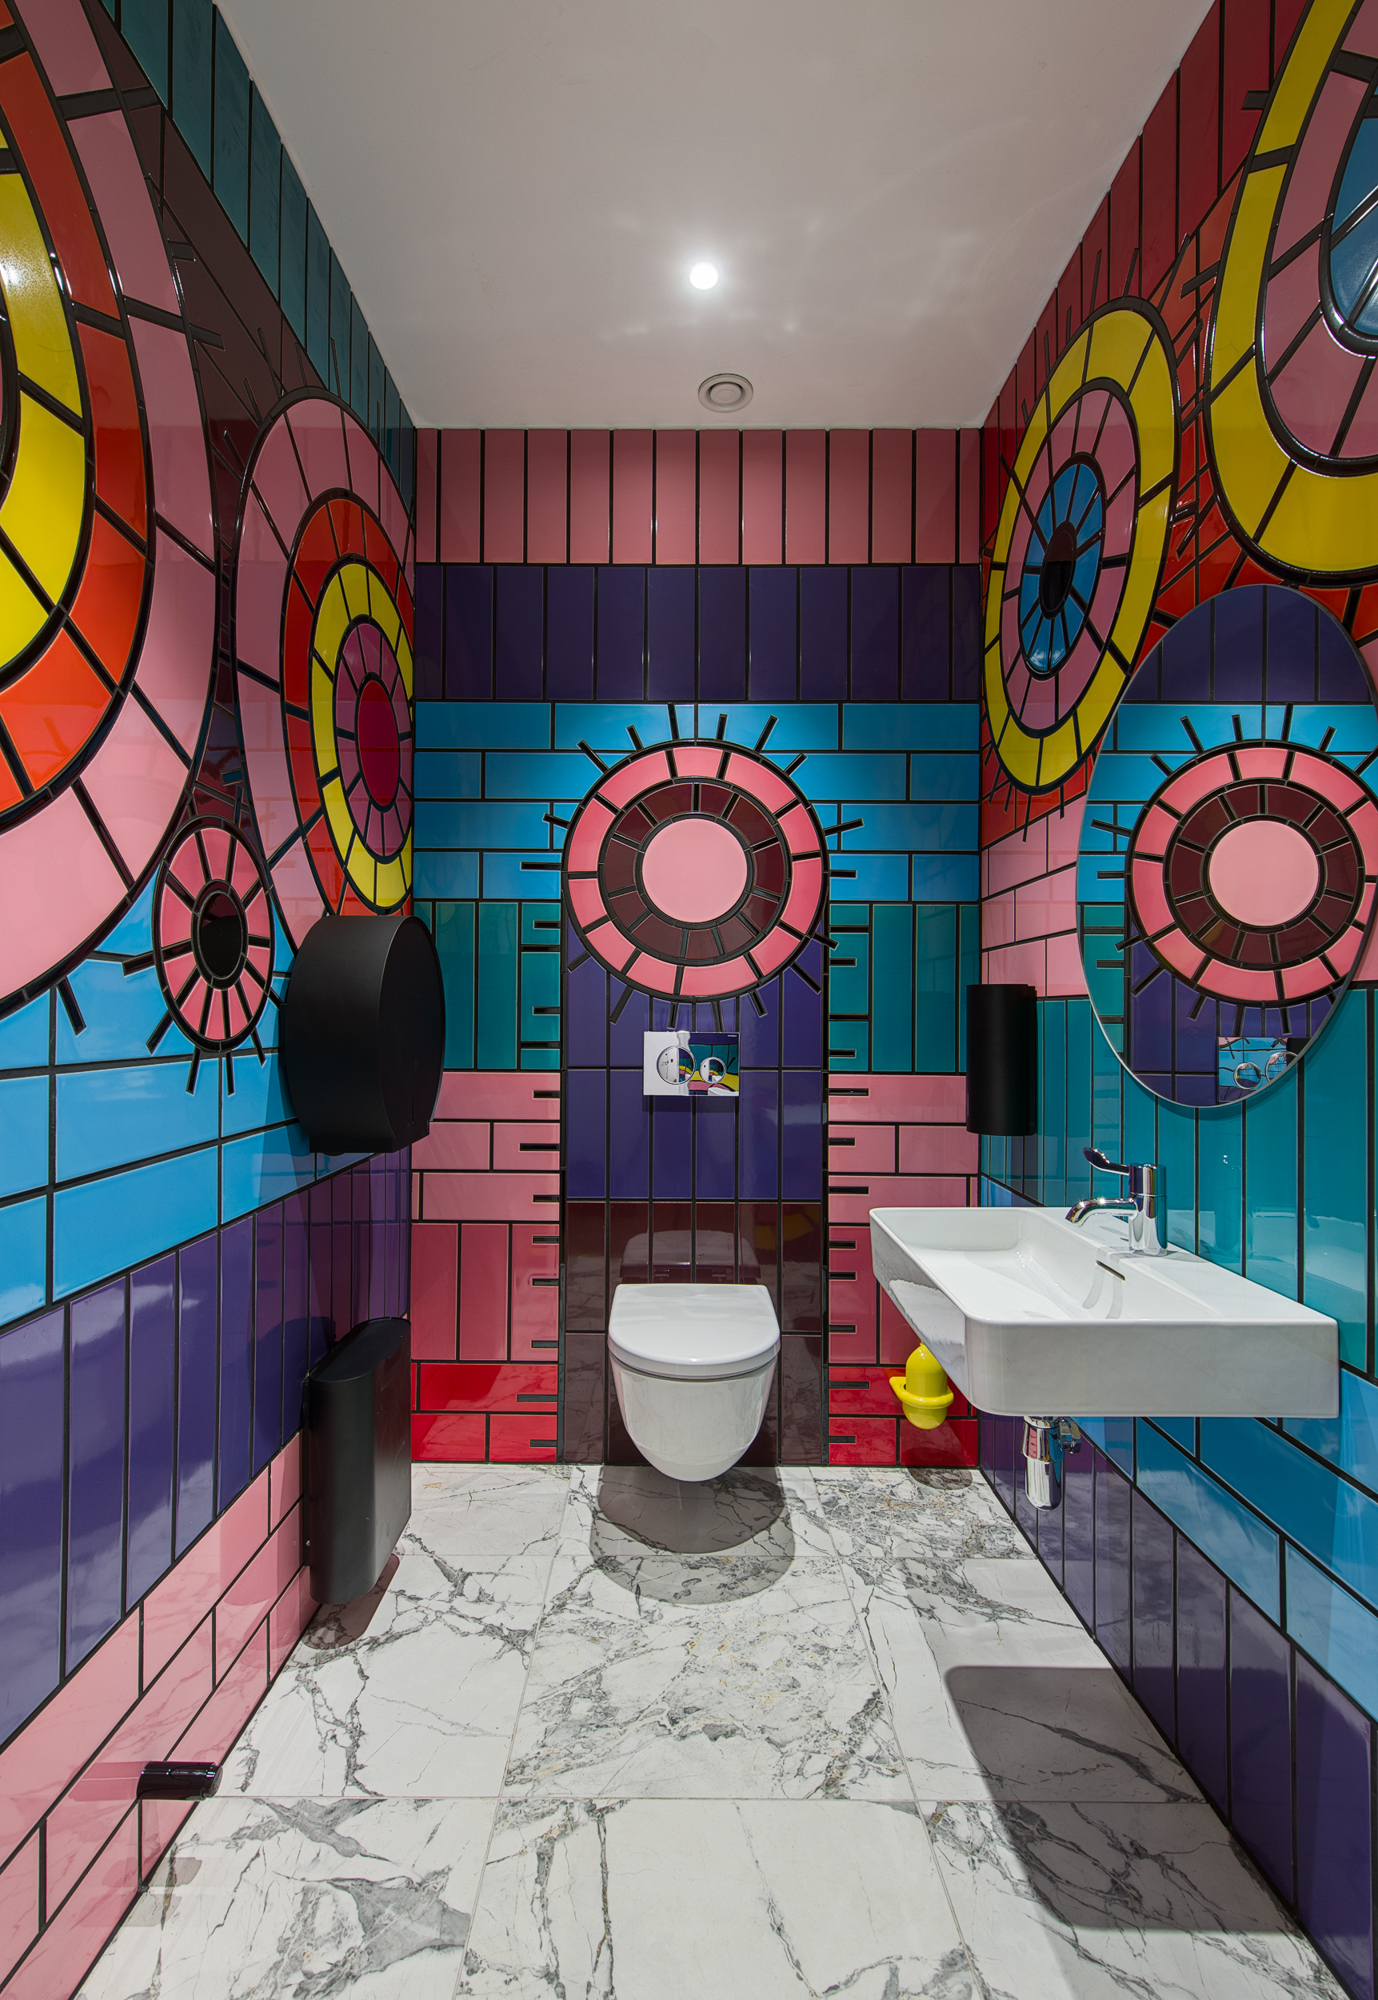 A photograph of a bathroom, with a view of 3 walls. The bathroom walls are covered in blue, purple and pink tiles in stripes, with pink and yellow circles of tiles. On the back wall is a white toilet with the seat down, with a square sink on the right wall, and a black toilet roll holder and sanitary bin on the left wall. The floor is white marble, and the ceiling is white.